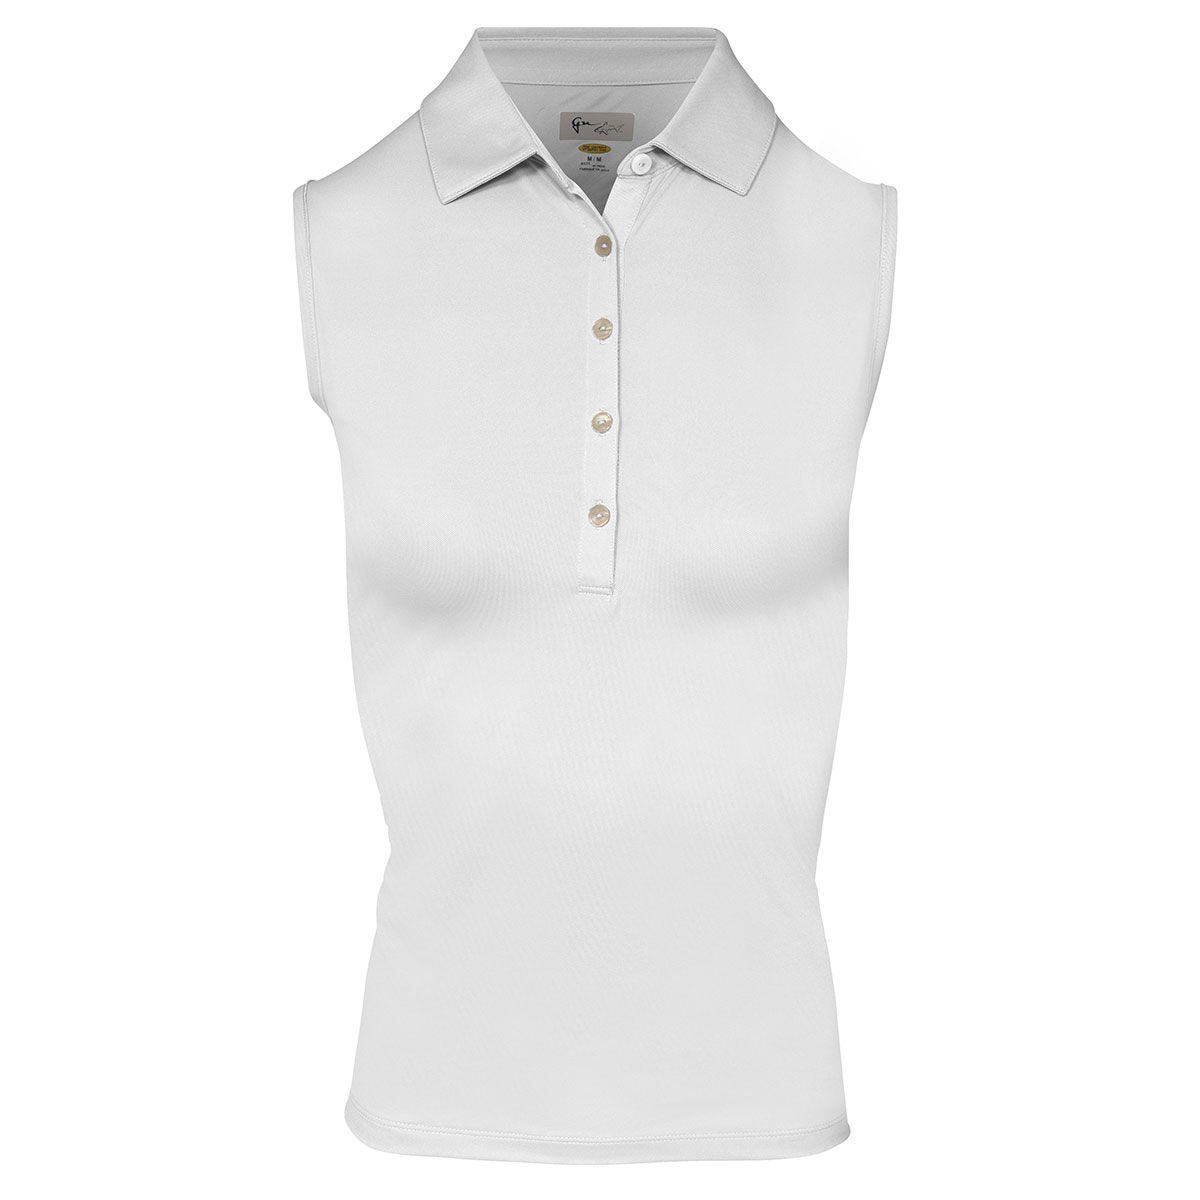 Greg Norman Golf Polo Shirt, Womens White Freedom Pique Sleeveless, Size: Large| American Golf